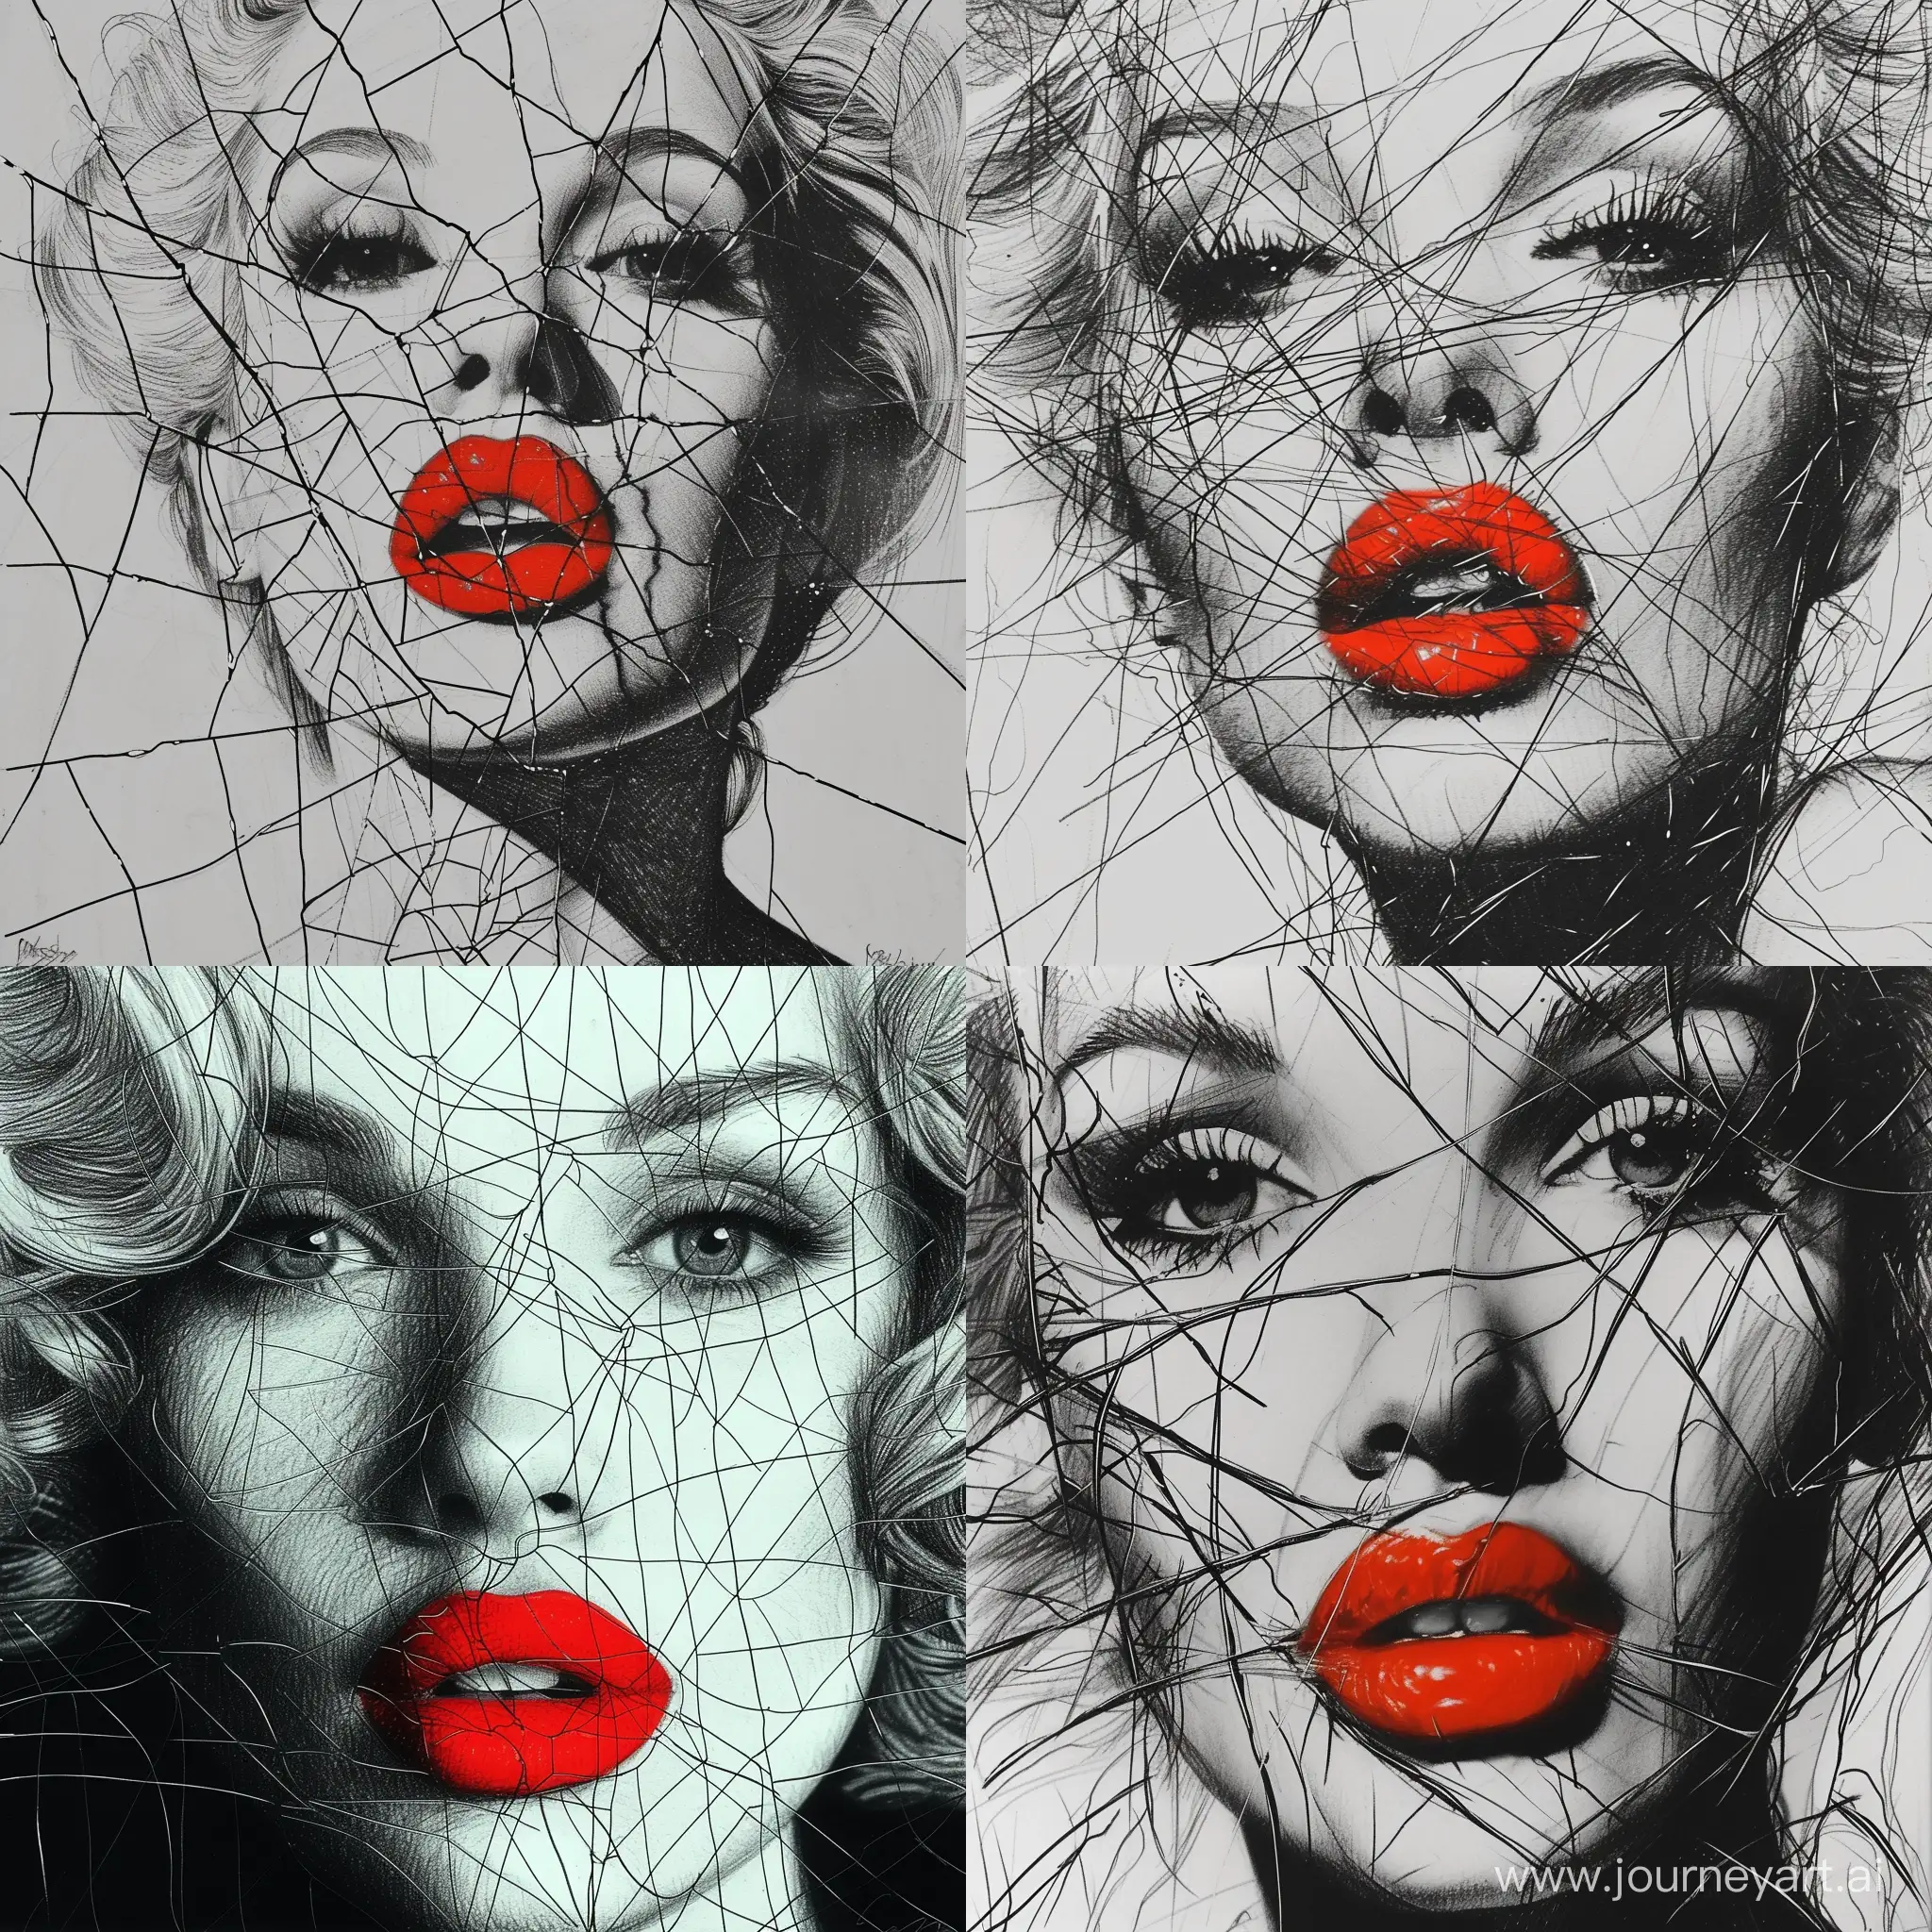 Create me a realist drawing of a girl that looks like marylin monroe in black and white with bright red lips, artsy lines sharp contrast, sketch